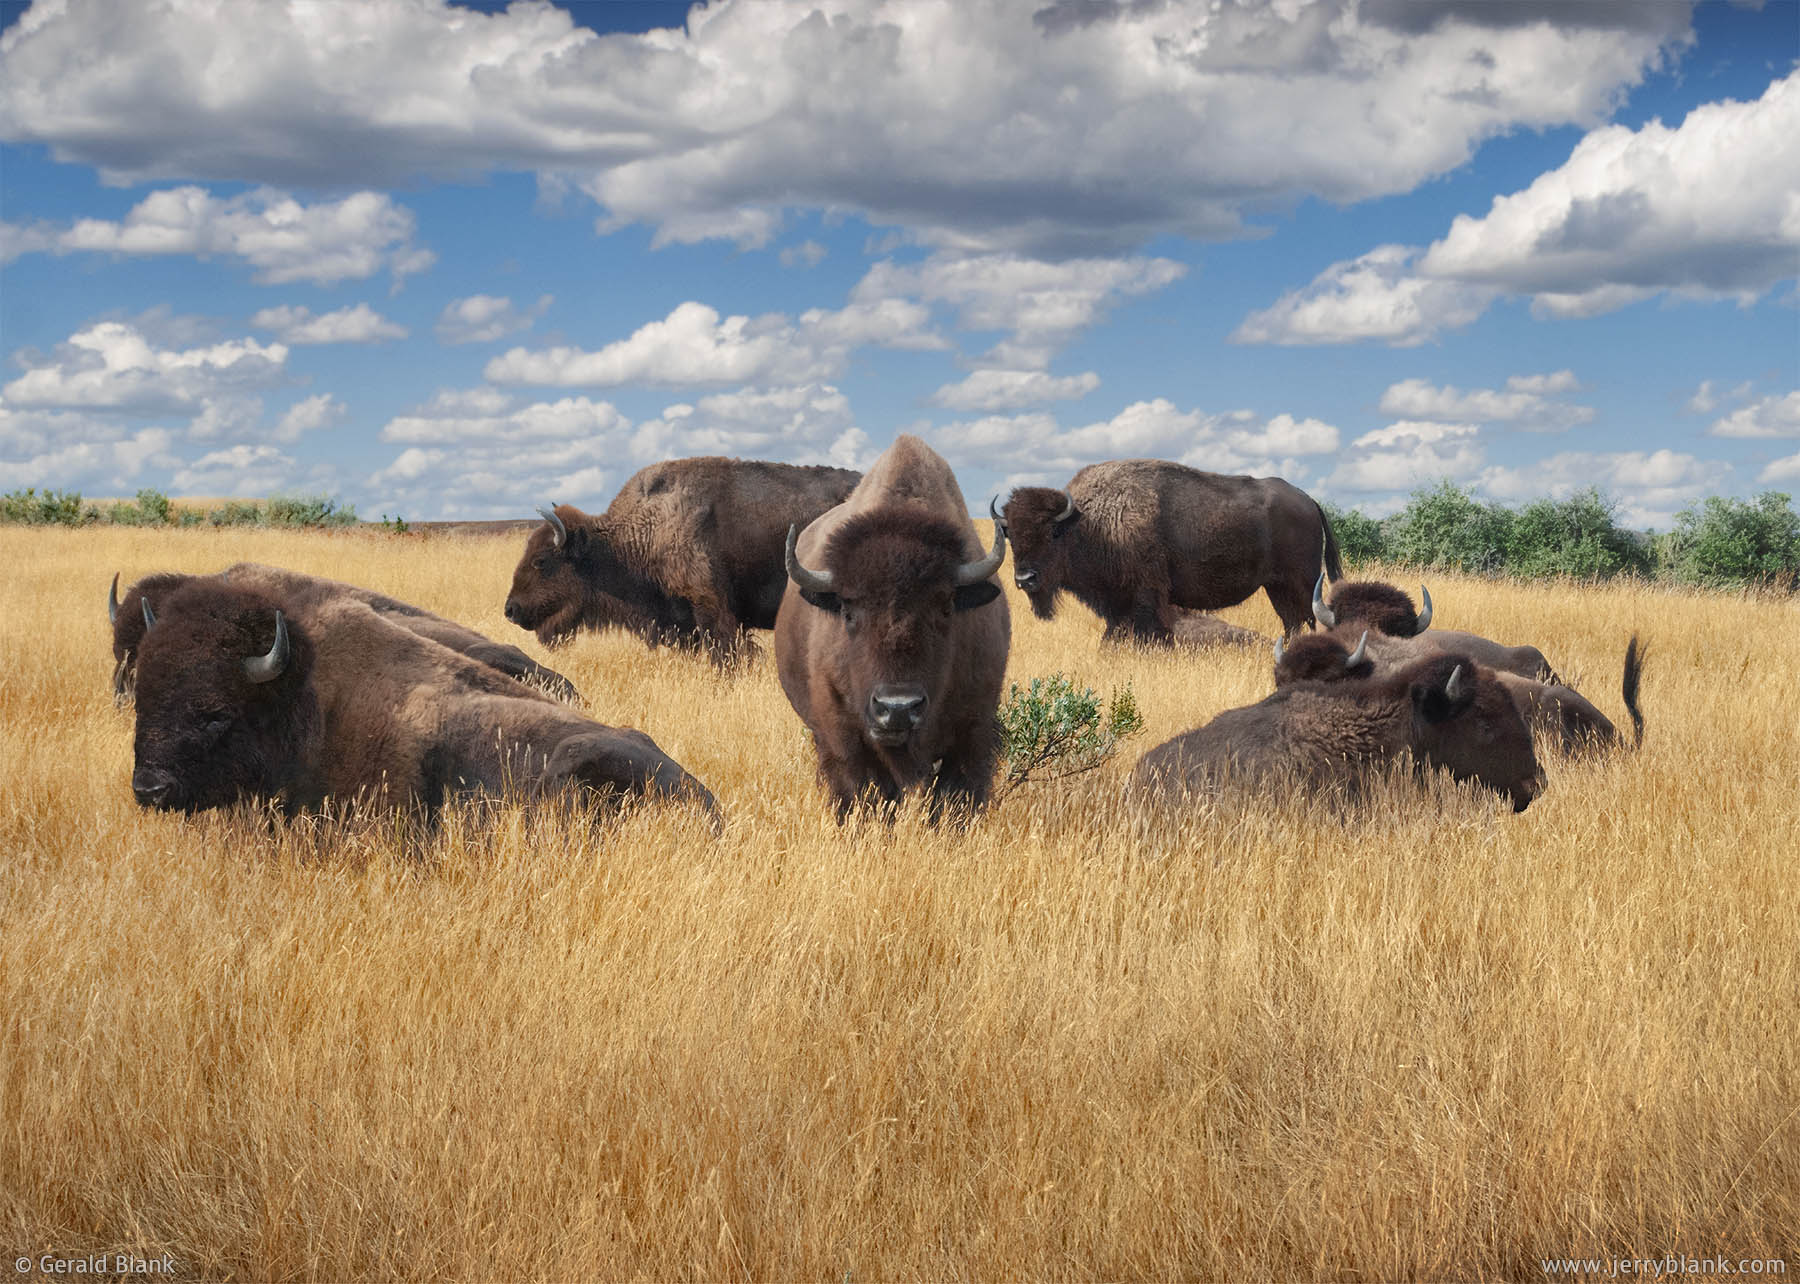 #02531 - A group of bison poses for the camera near the Painted Canyon Nature Trail in Theodore Roosevelt National Park, North Dakota - photo by Jerry Blank